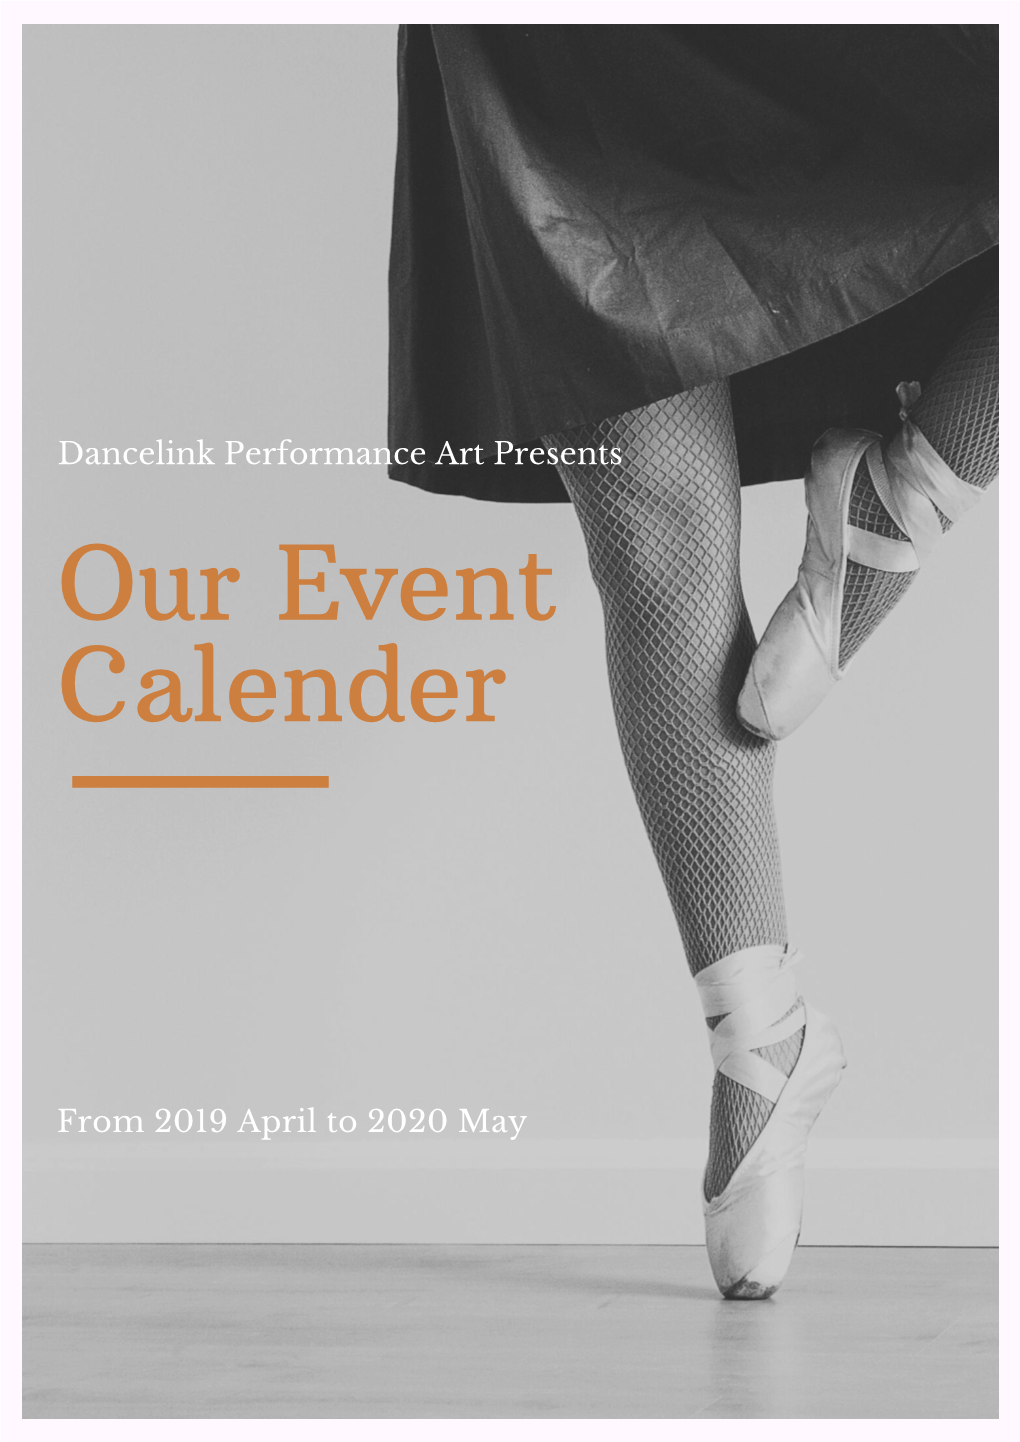 Dancelink Performance Art Presents from 2019 April to 2020